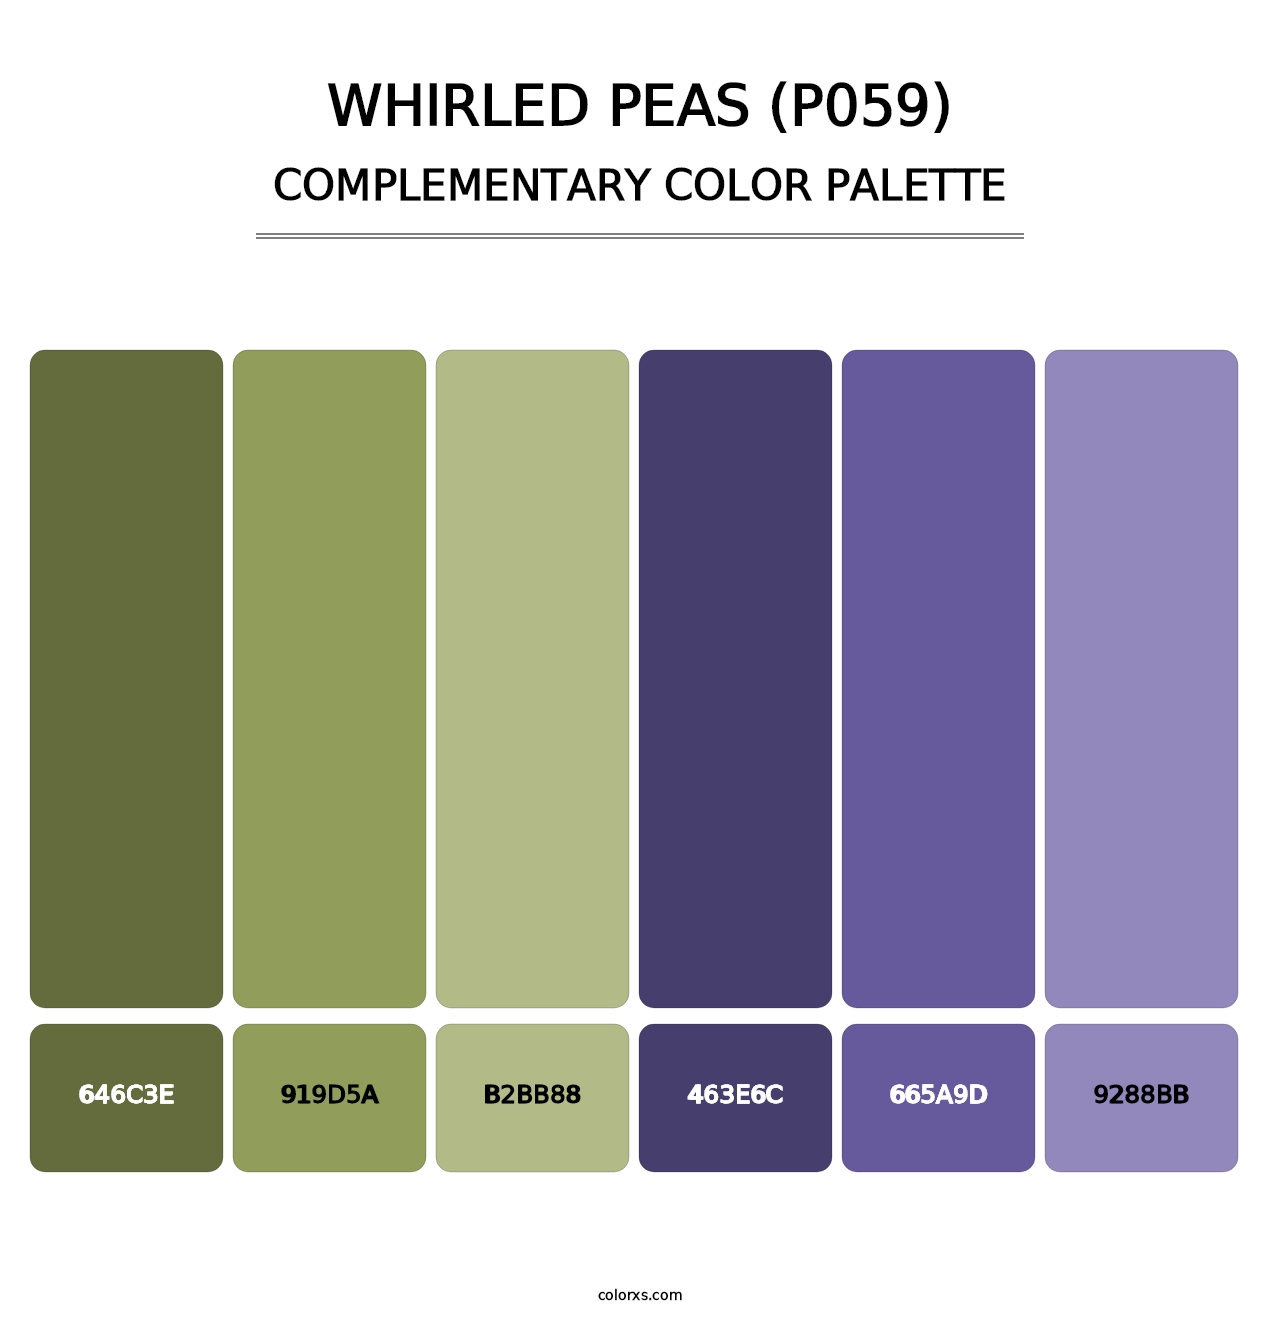 Whirled Peas (P059) - Complementary Color Palette